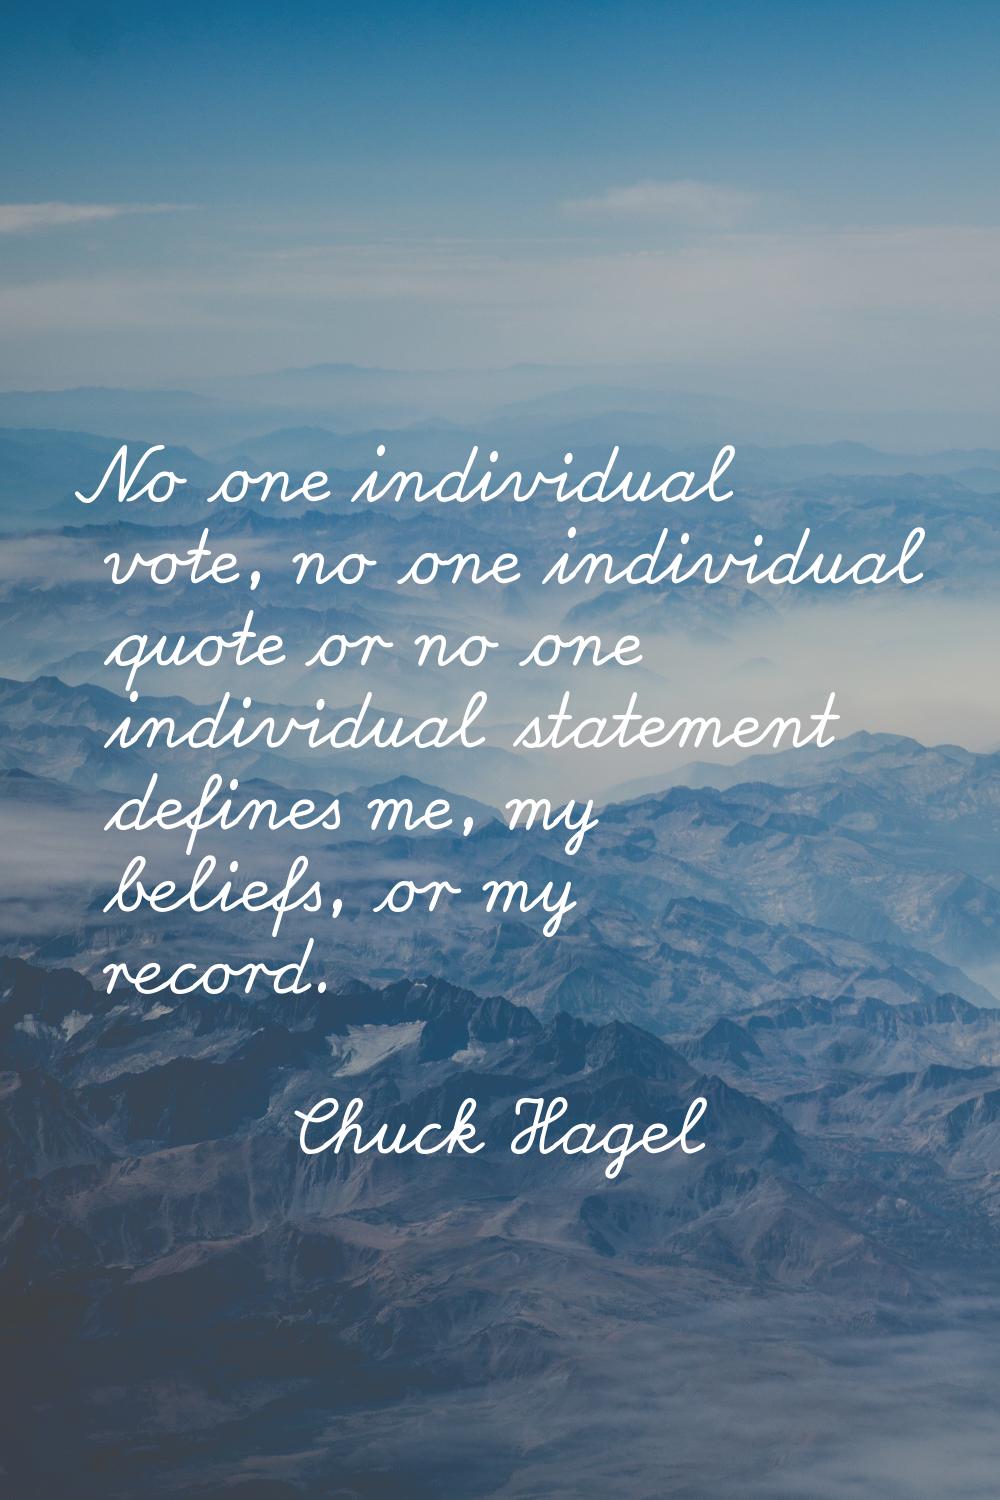 No one individual vote, no one individual quote or no one individual statement defines me, my belie